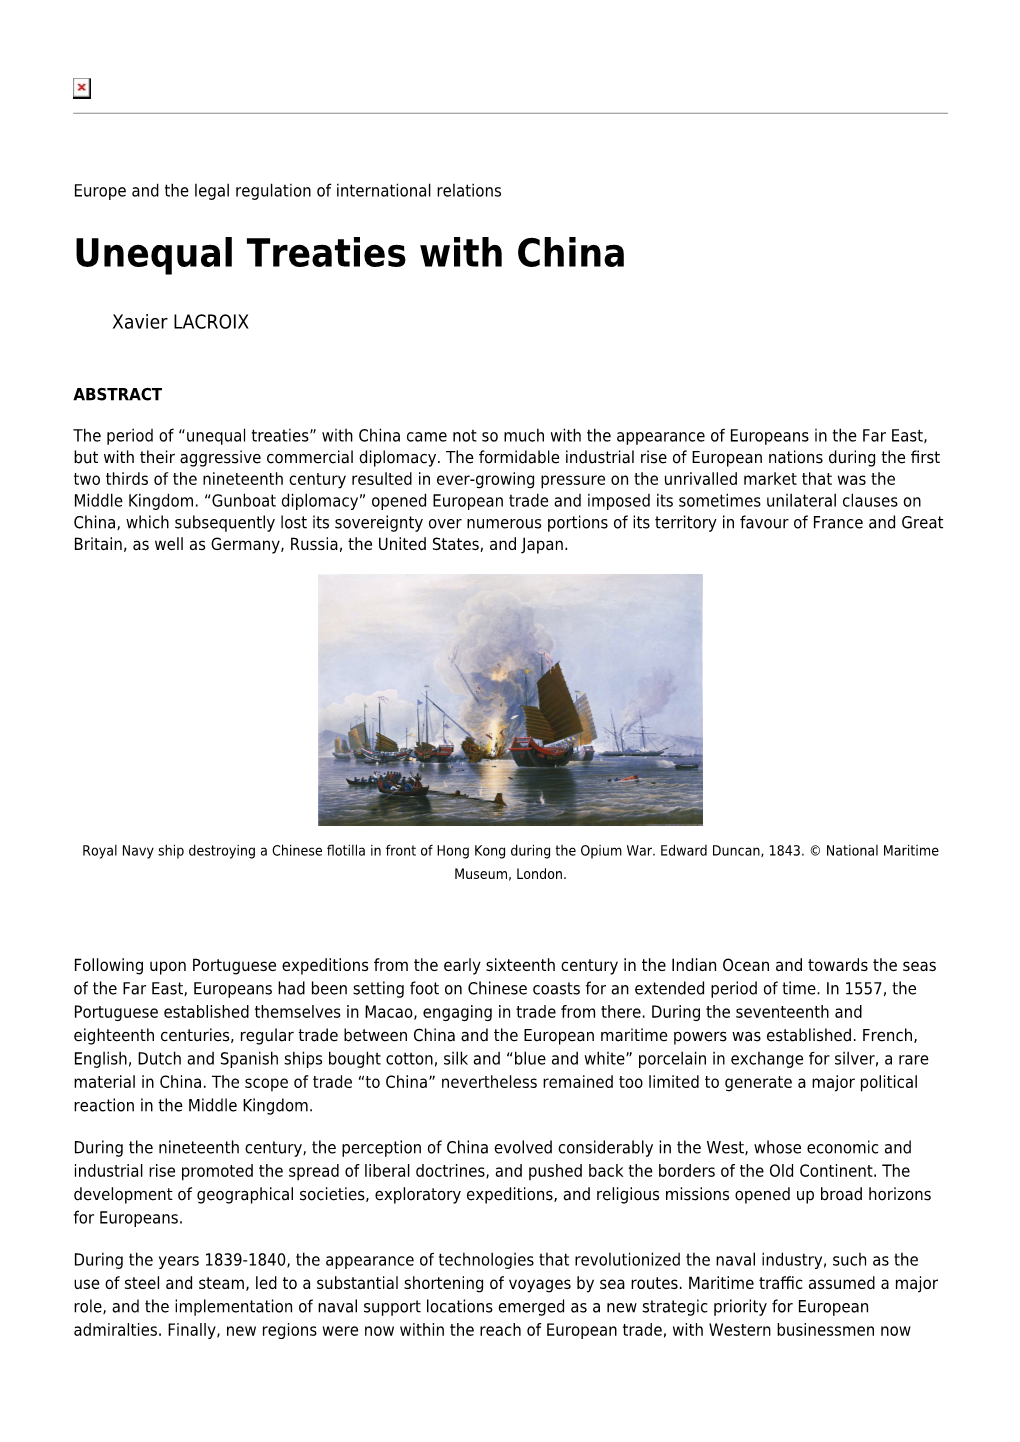 Unequal Treaties with China